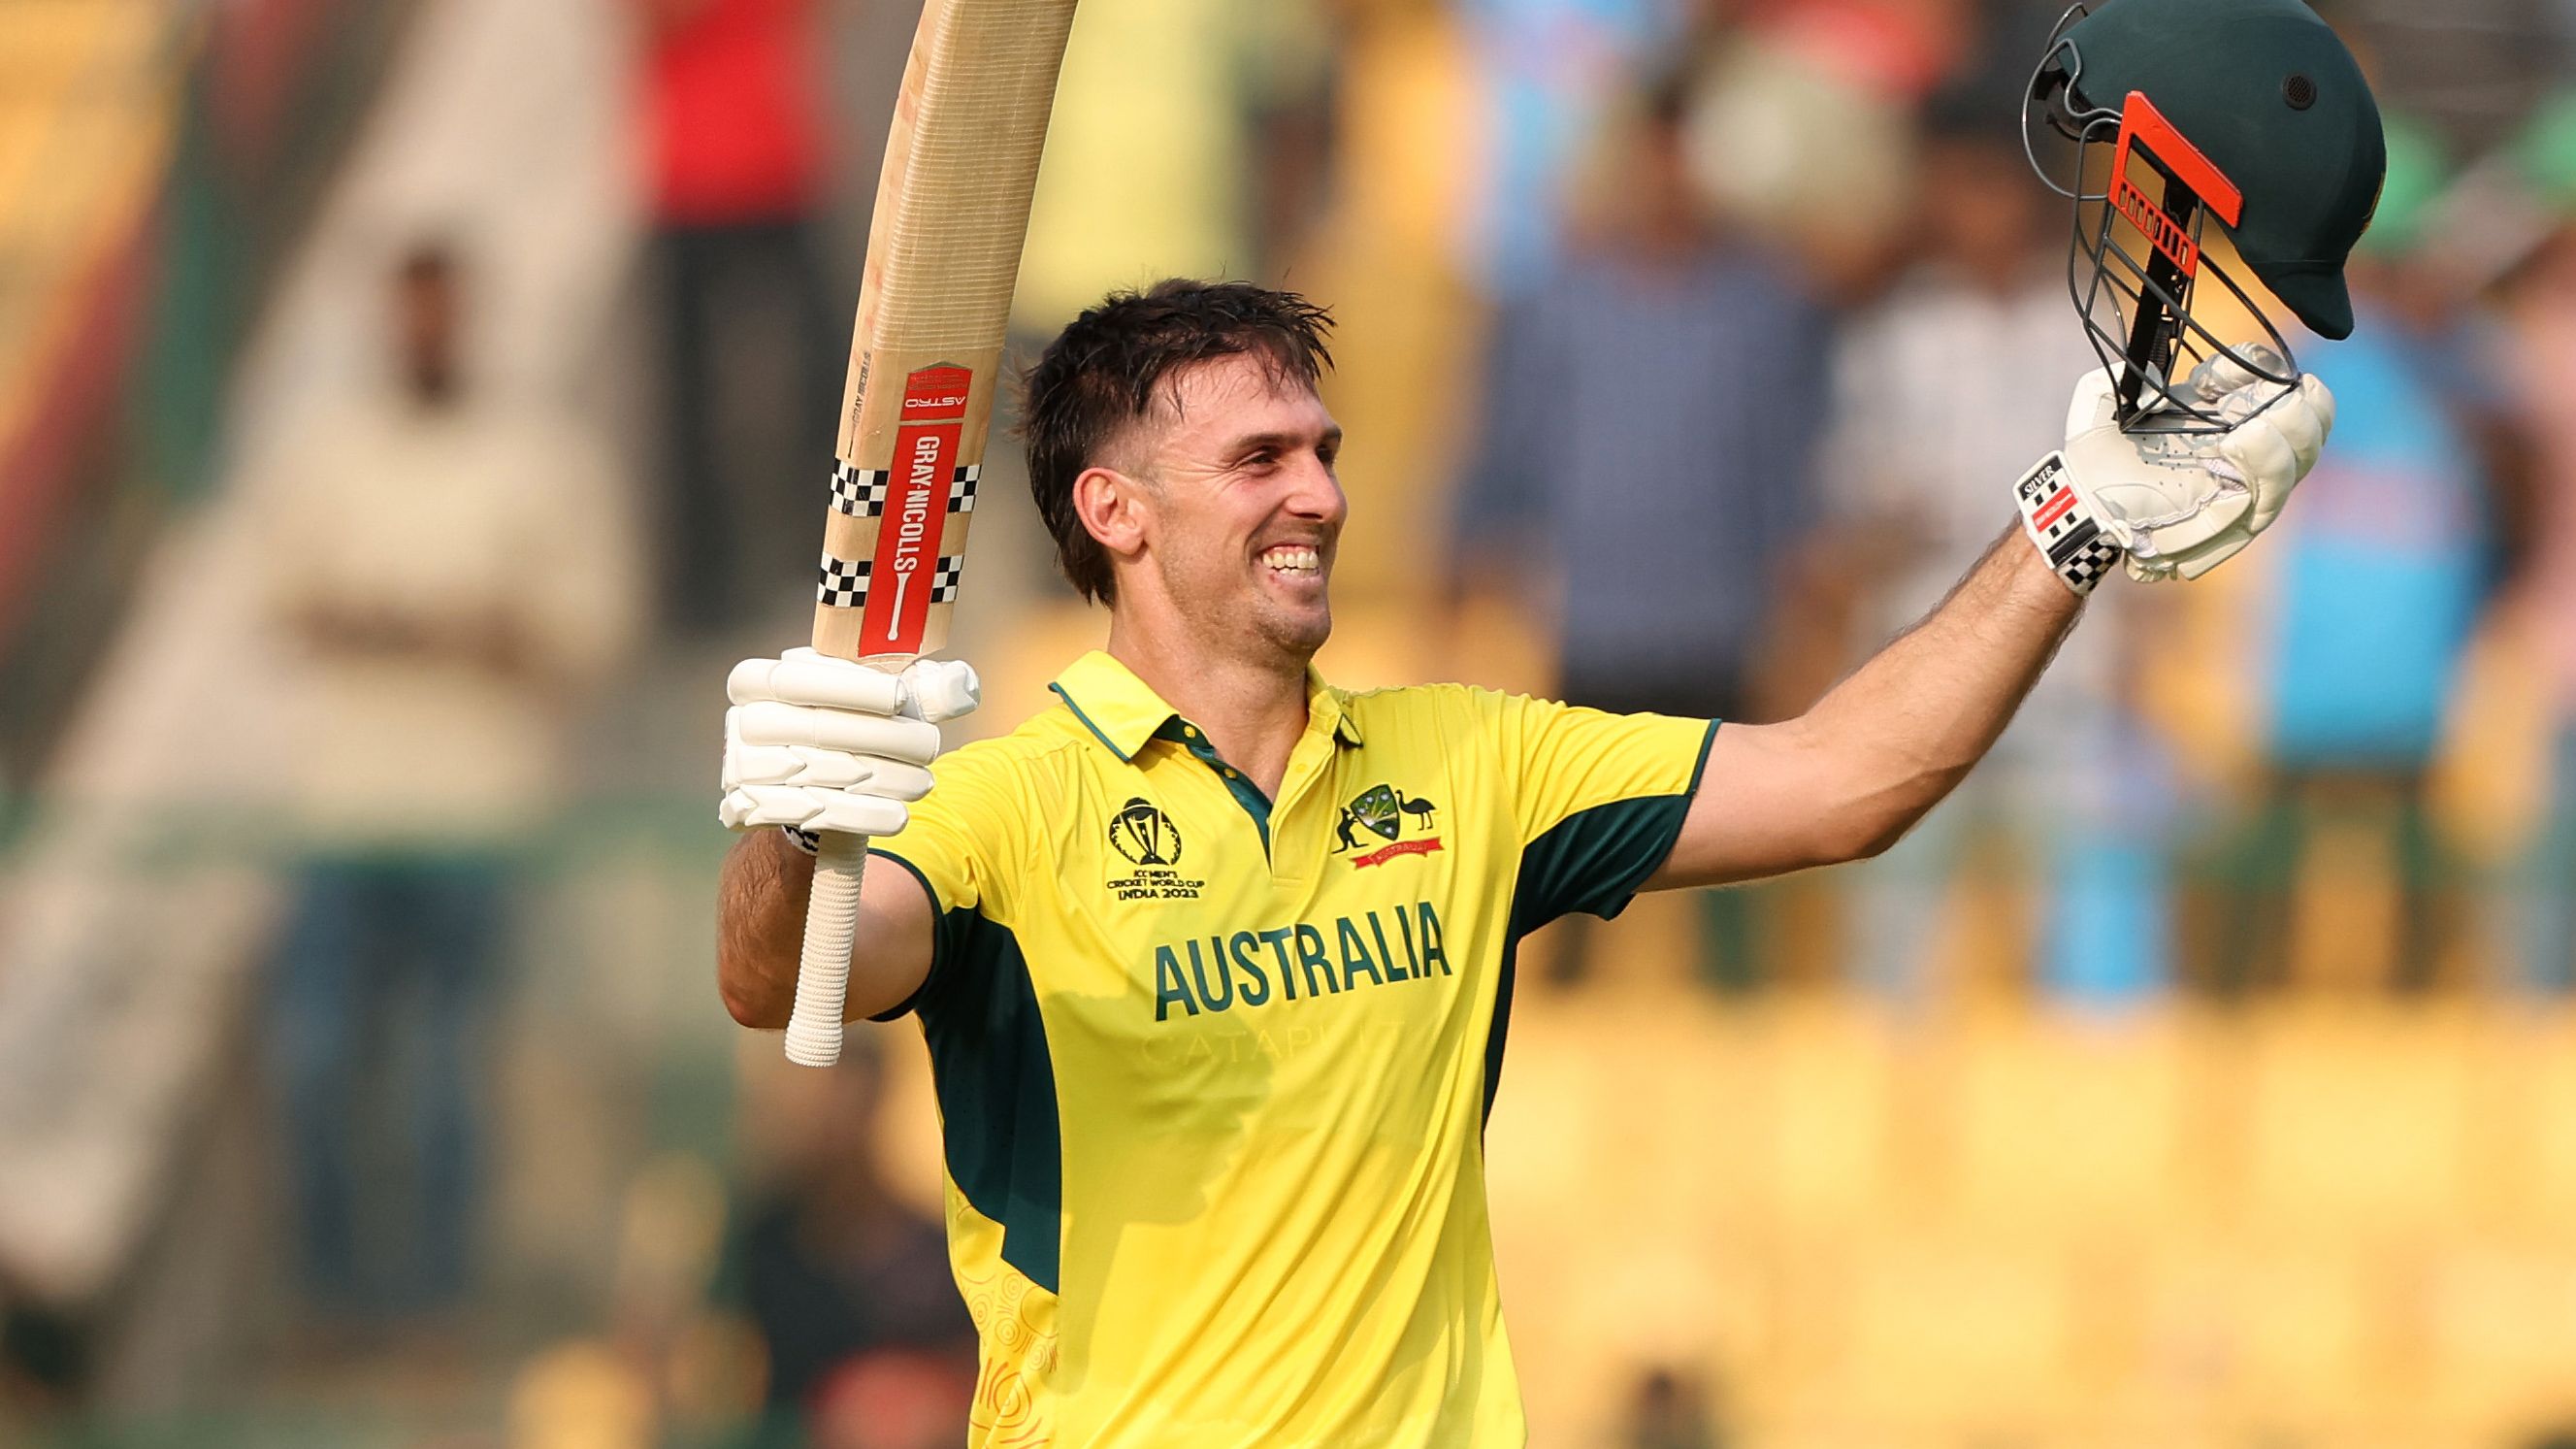 Mitch Marsh of Australia celebrates their century during the ICC Men&#x27;s Cricket World Cup India 2023 between Australia and Pakistan at M. Chinnaswamy Stadium on October 20, 2023 in Bangalore, India. (Photo by Robert Cianflone/Getty Images)